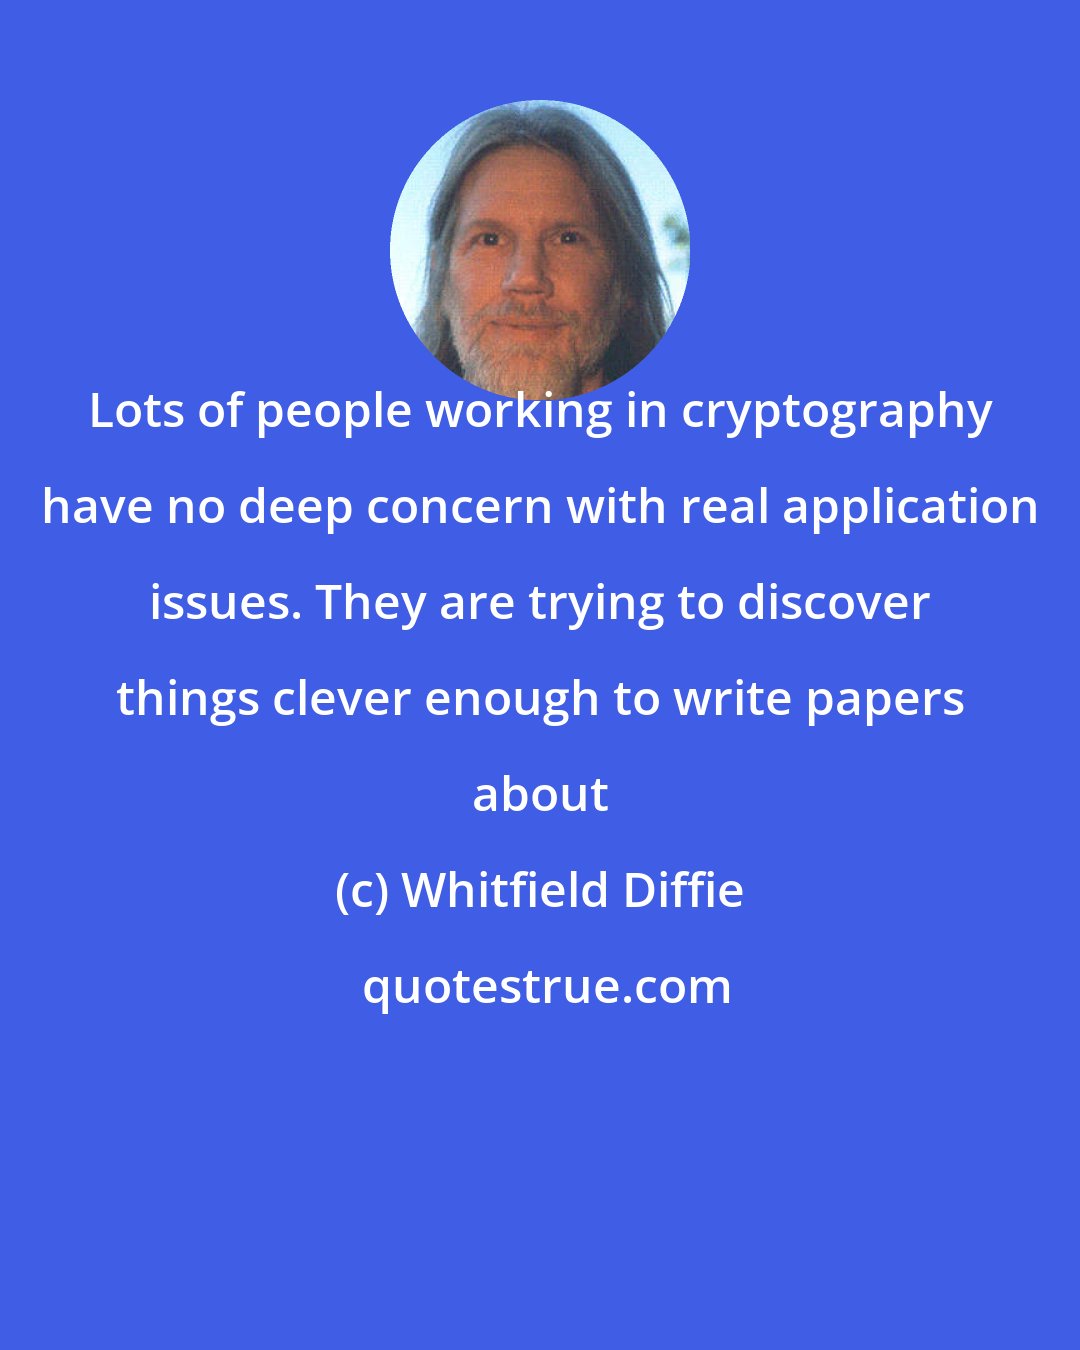 Whitfield Diffie: Lots of people working in cryptography have no deep concern with real application issues. They are trying to discover things clever enough to write papers about